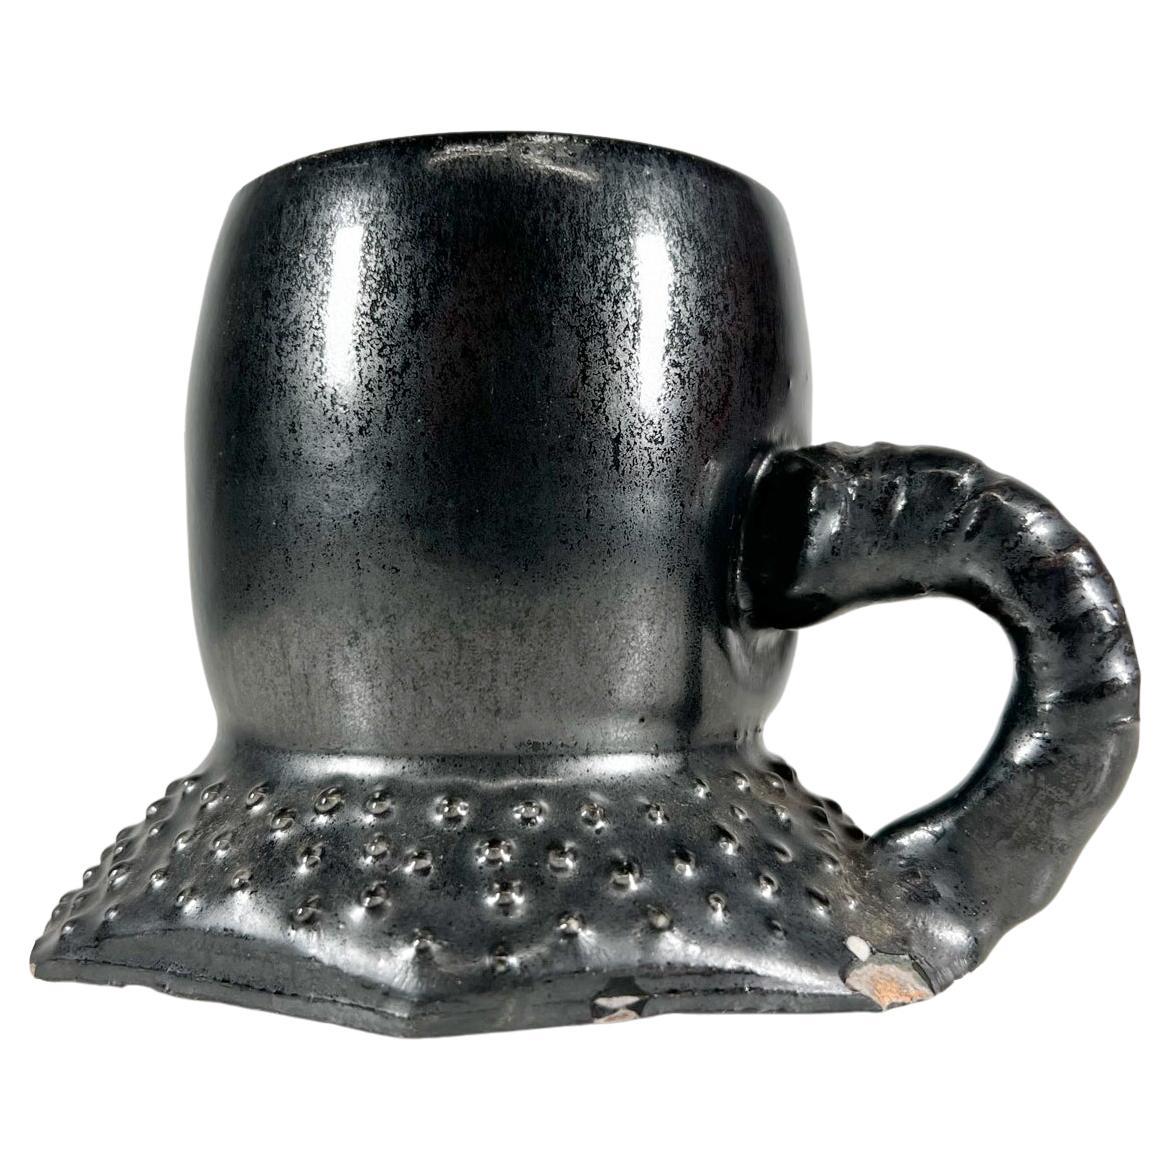 1983 Vintage Pottery Art Black Single Coffee Cup Mug Signed Melching For Sale